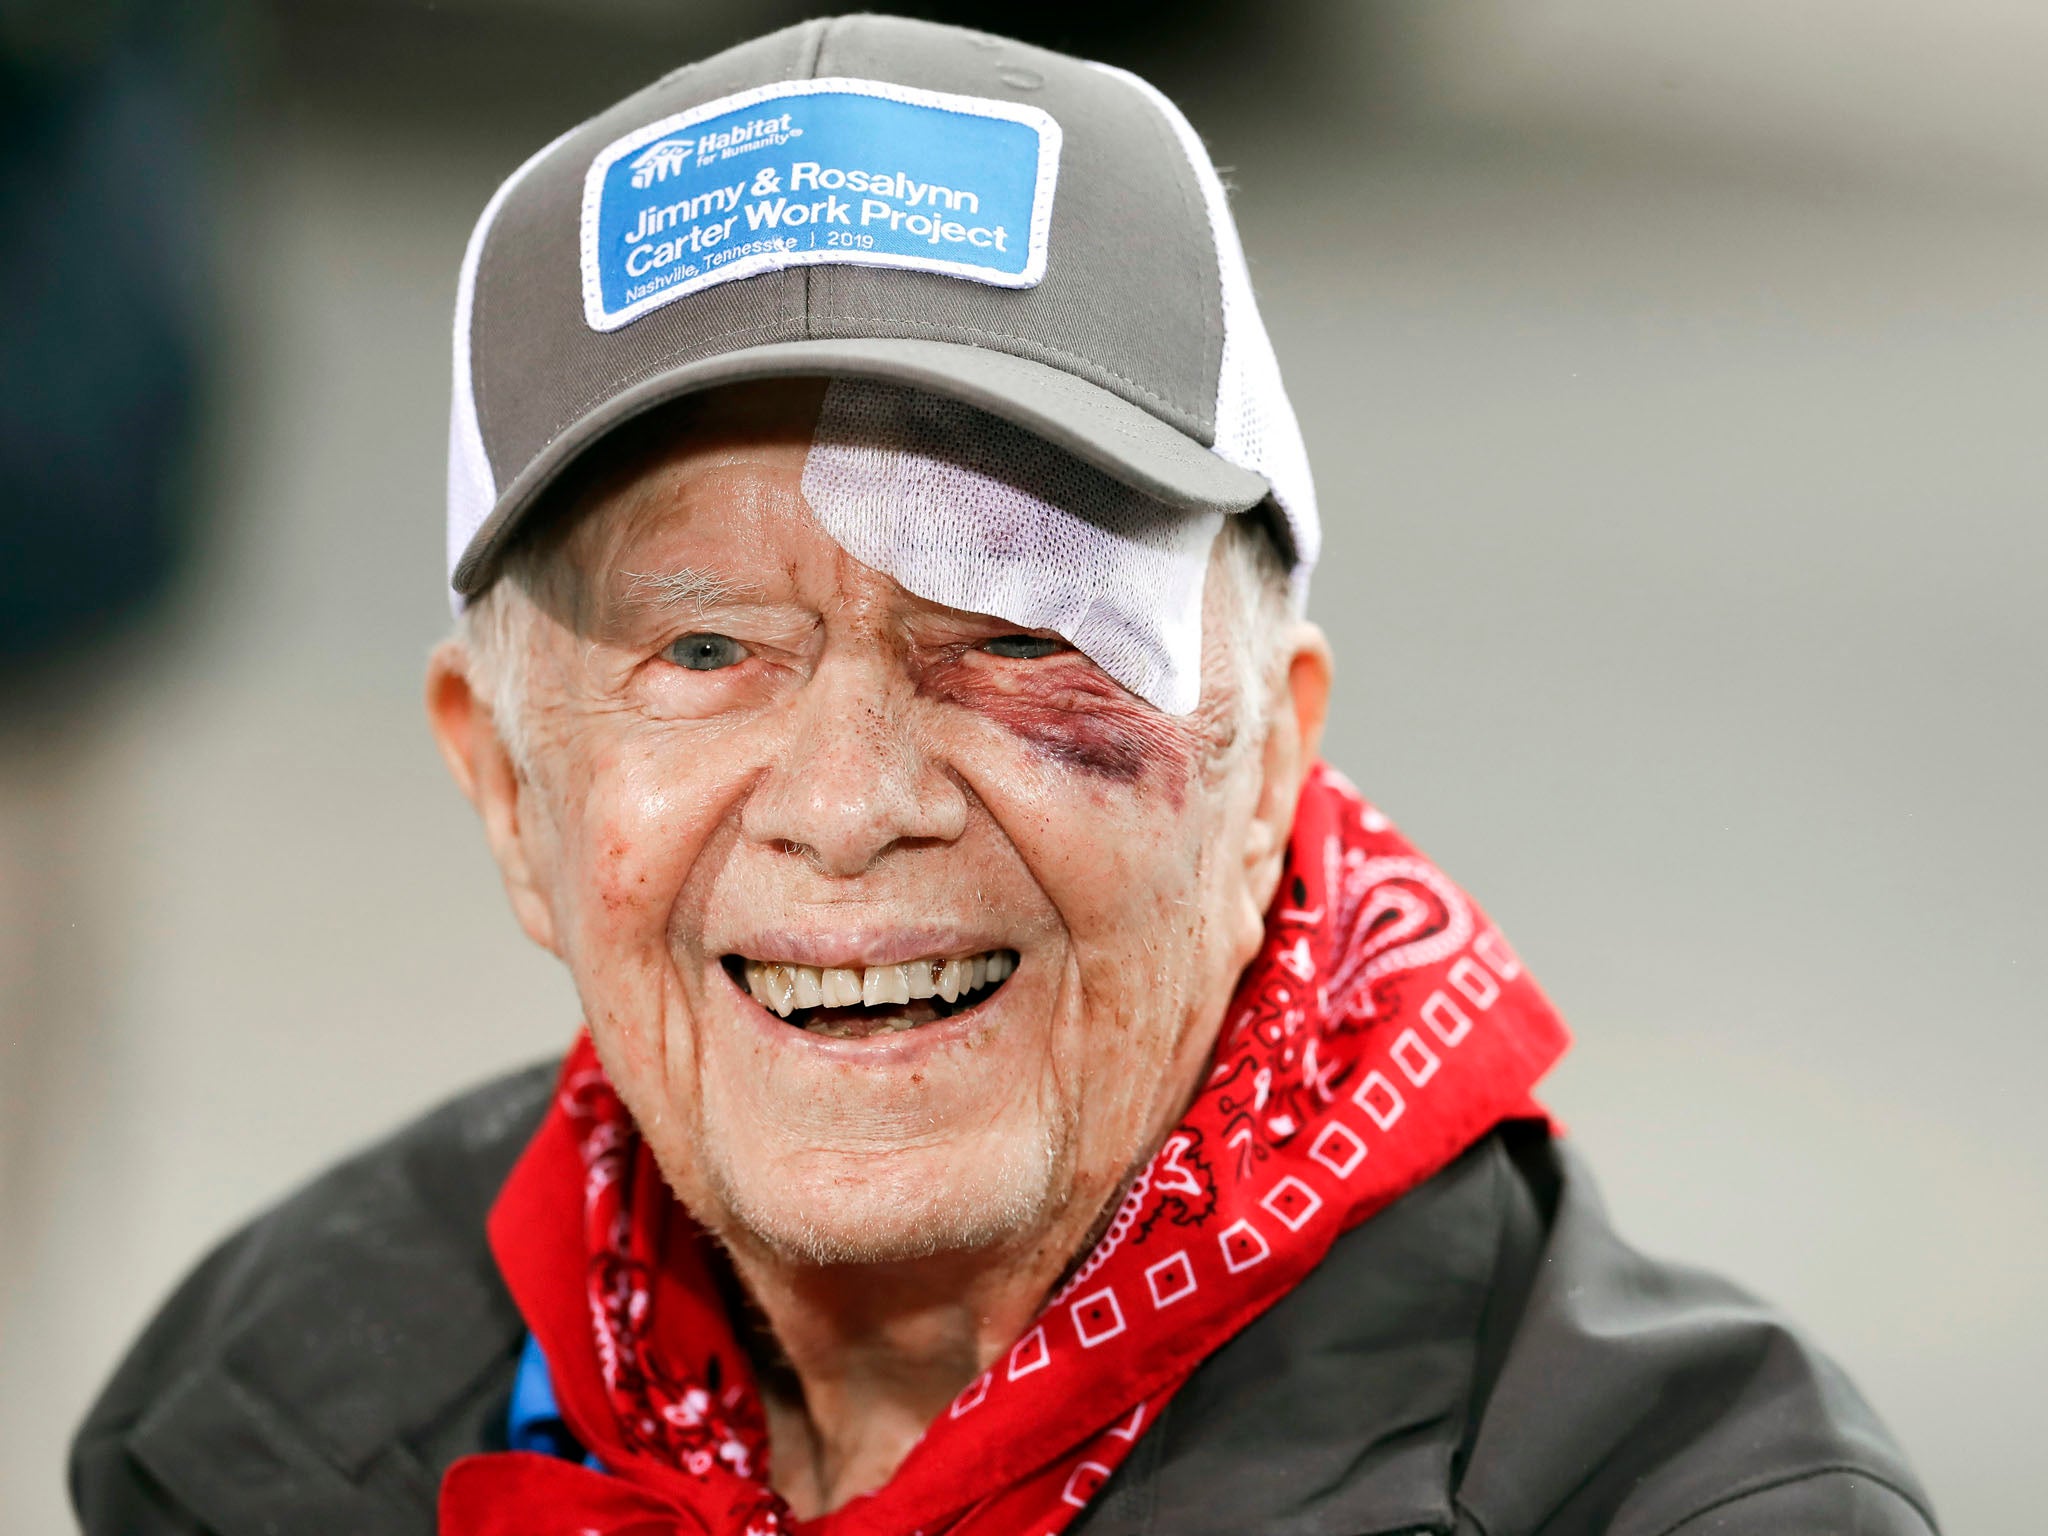 Jimmy Carter Former President Sports Black Eye After Falling At Home